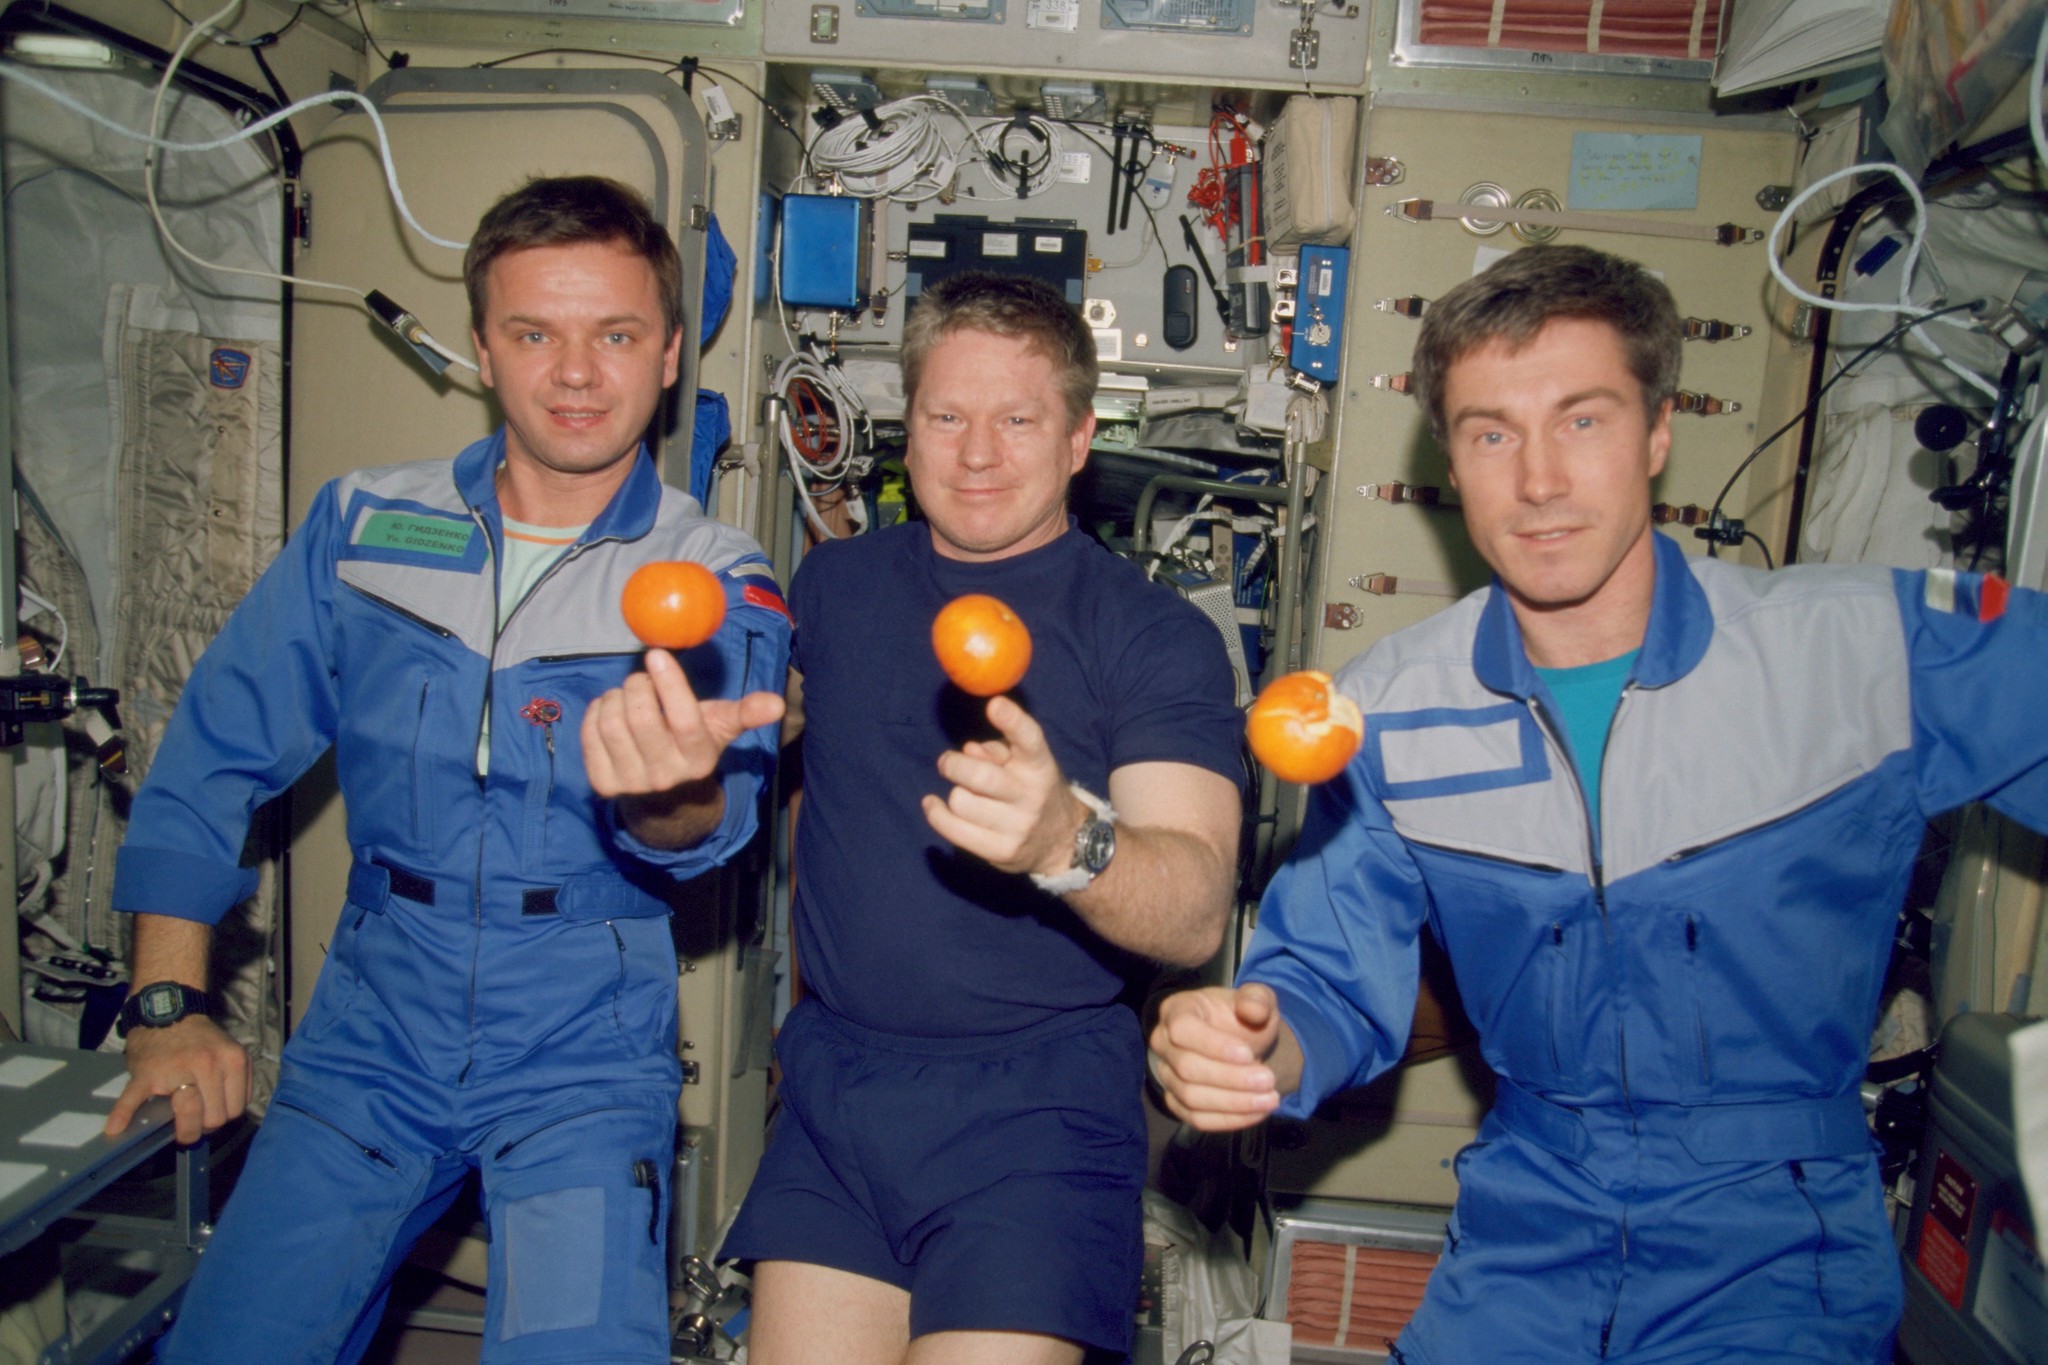 The International Space Station's 1st crew recalls a Halloween launch 20 years ago | Space